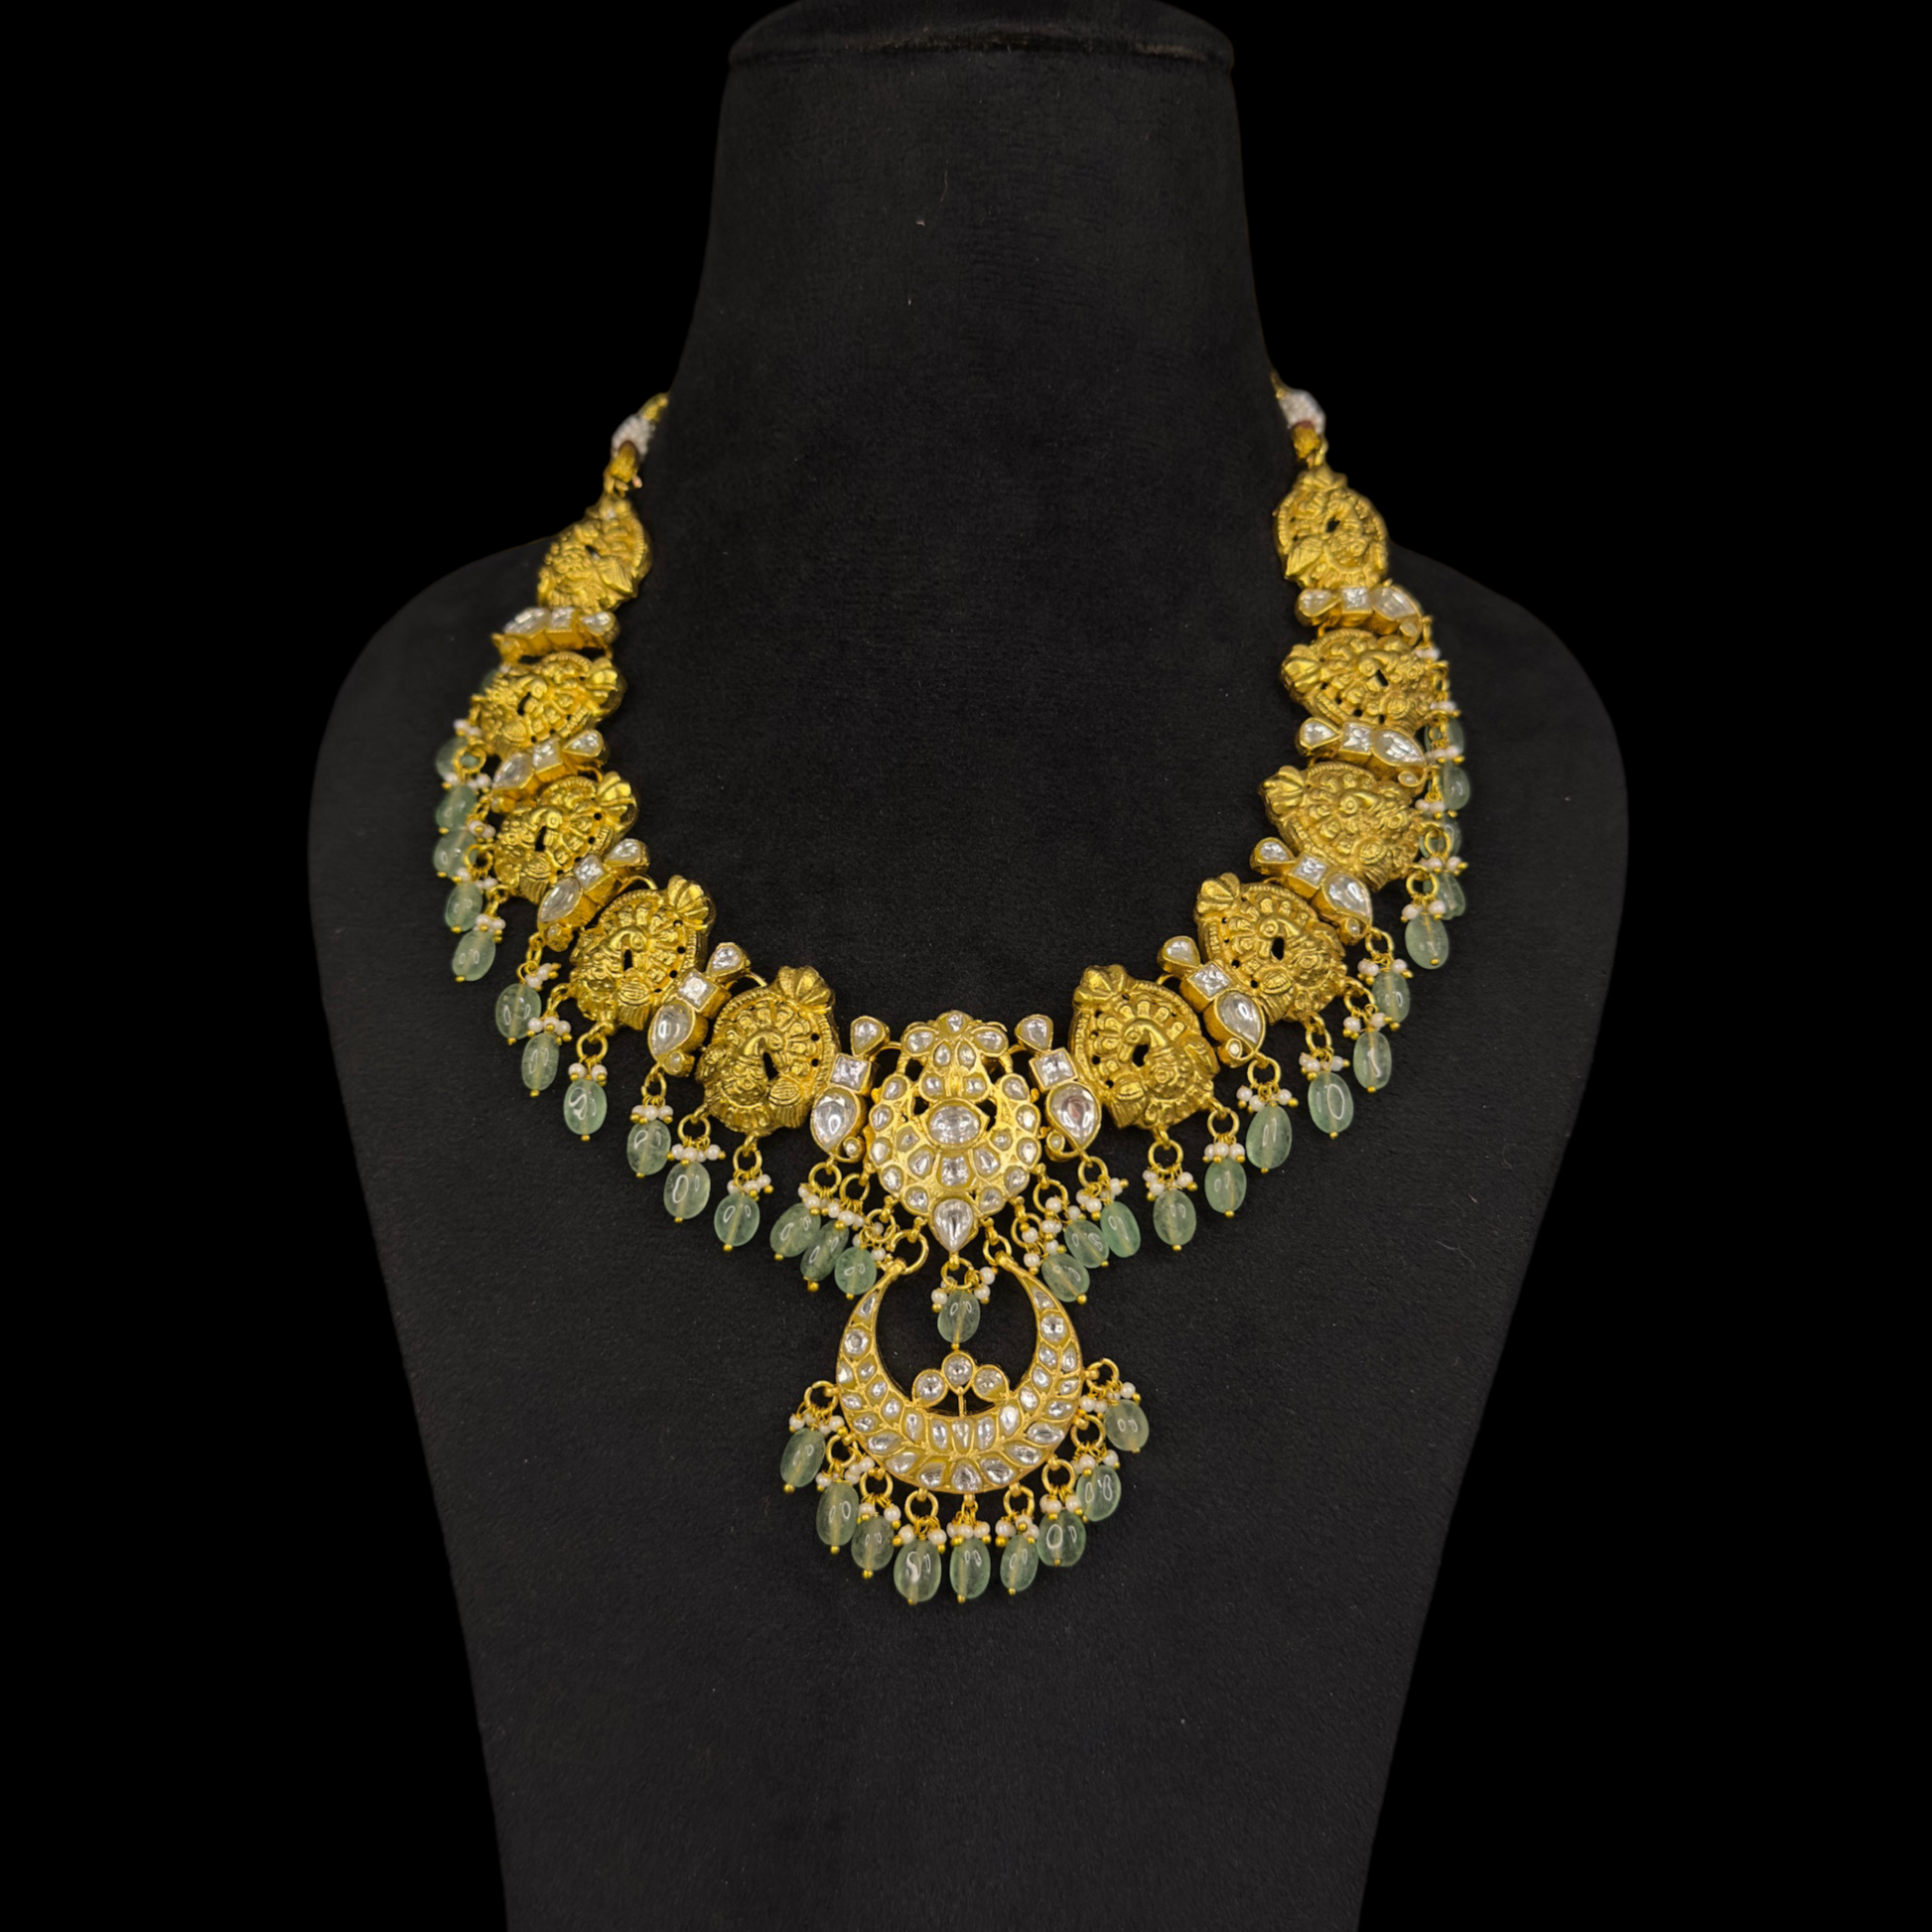 Ornate Peacock Jadau Kundan Necklace with Green Bead Accents with 22k gold plating This Product Belongs to Jadau Kundan Jewellery Category